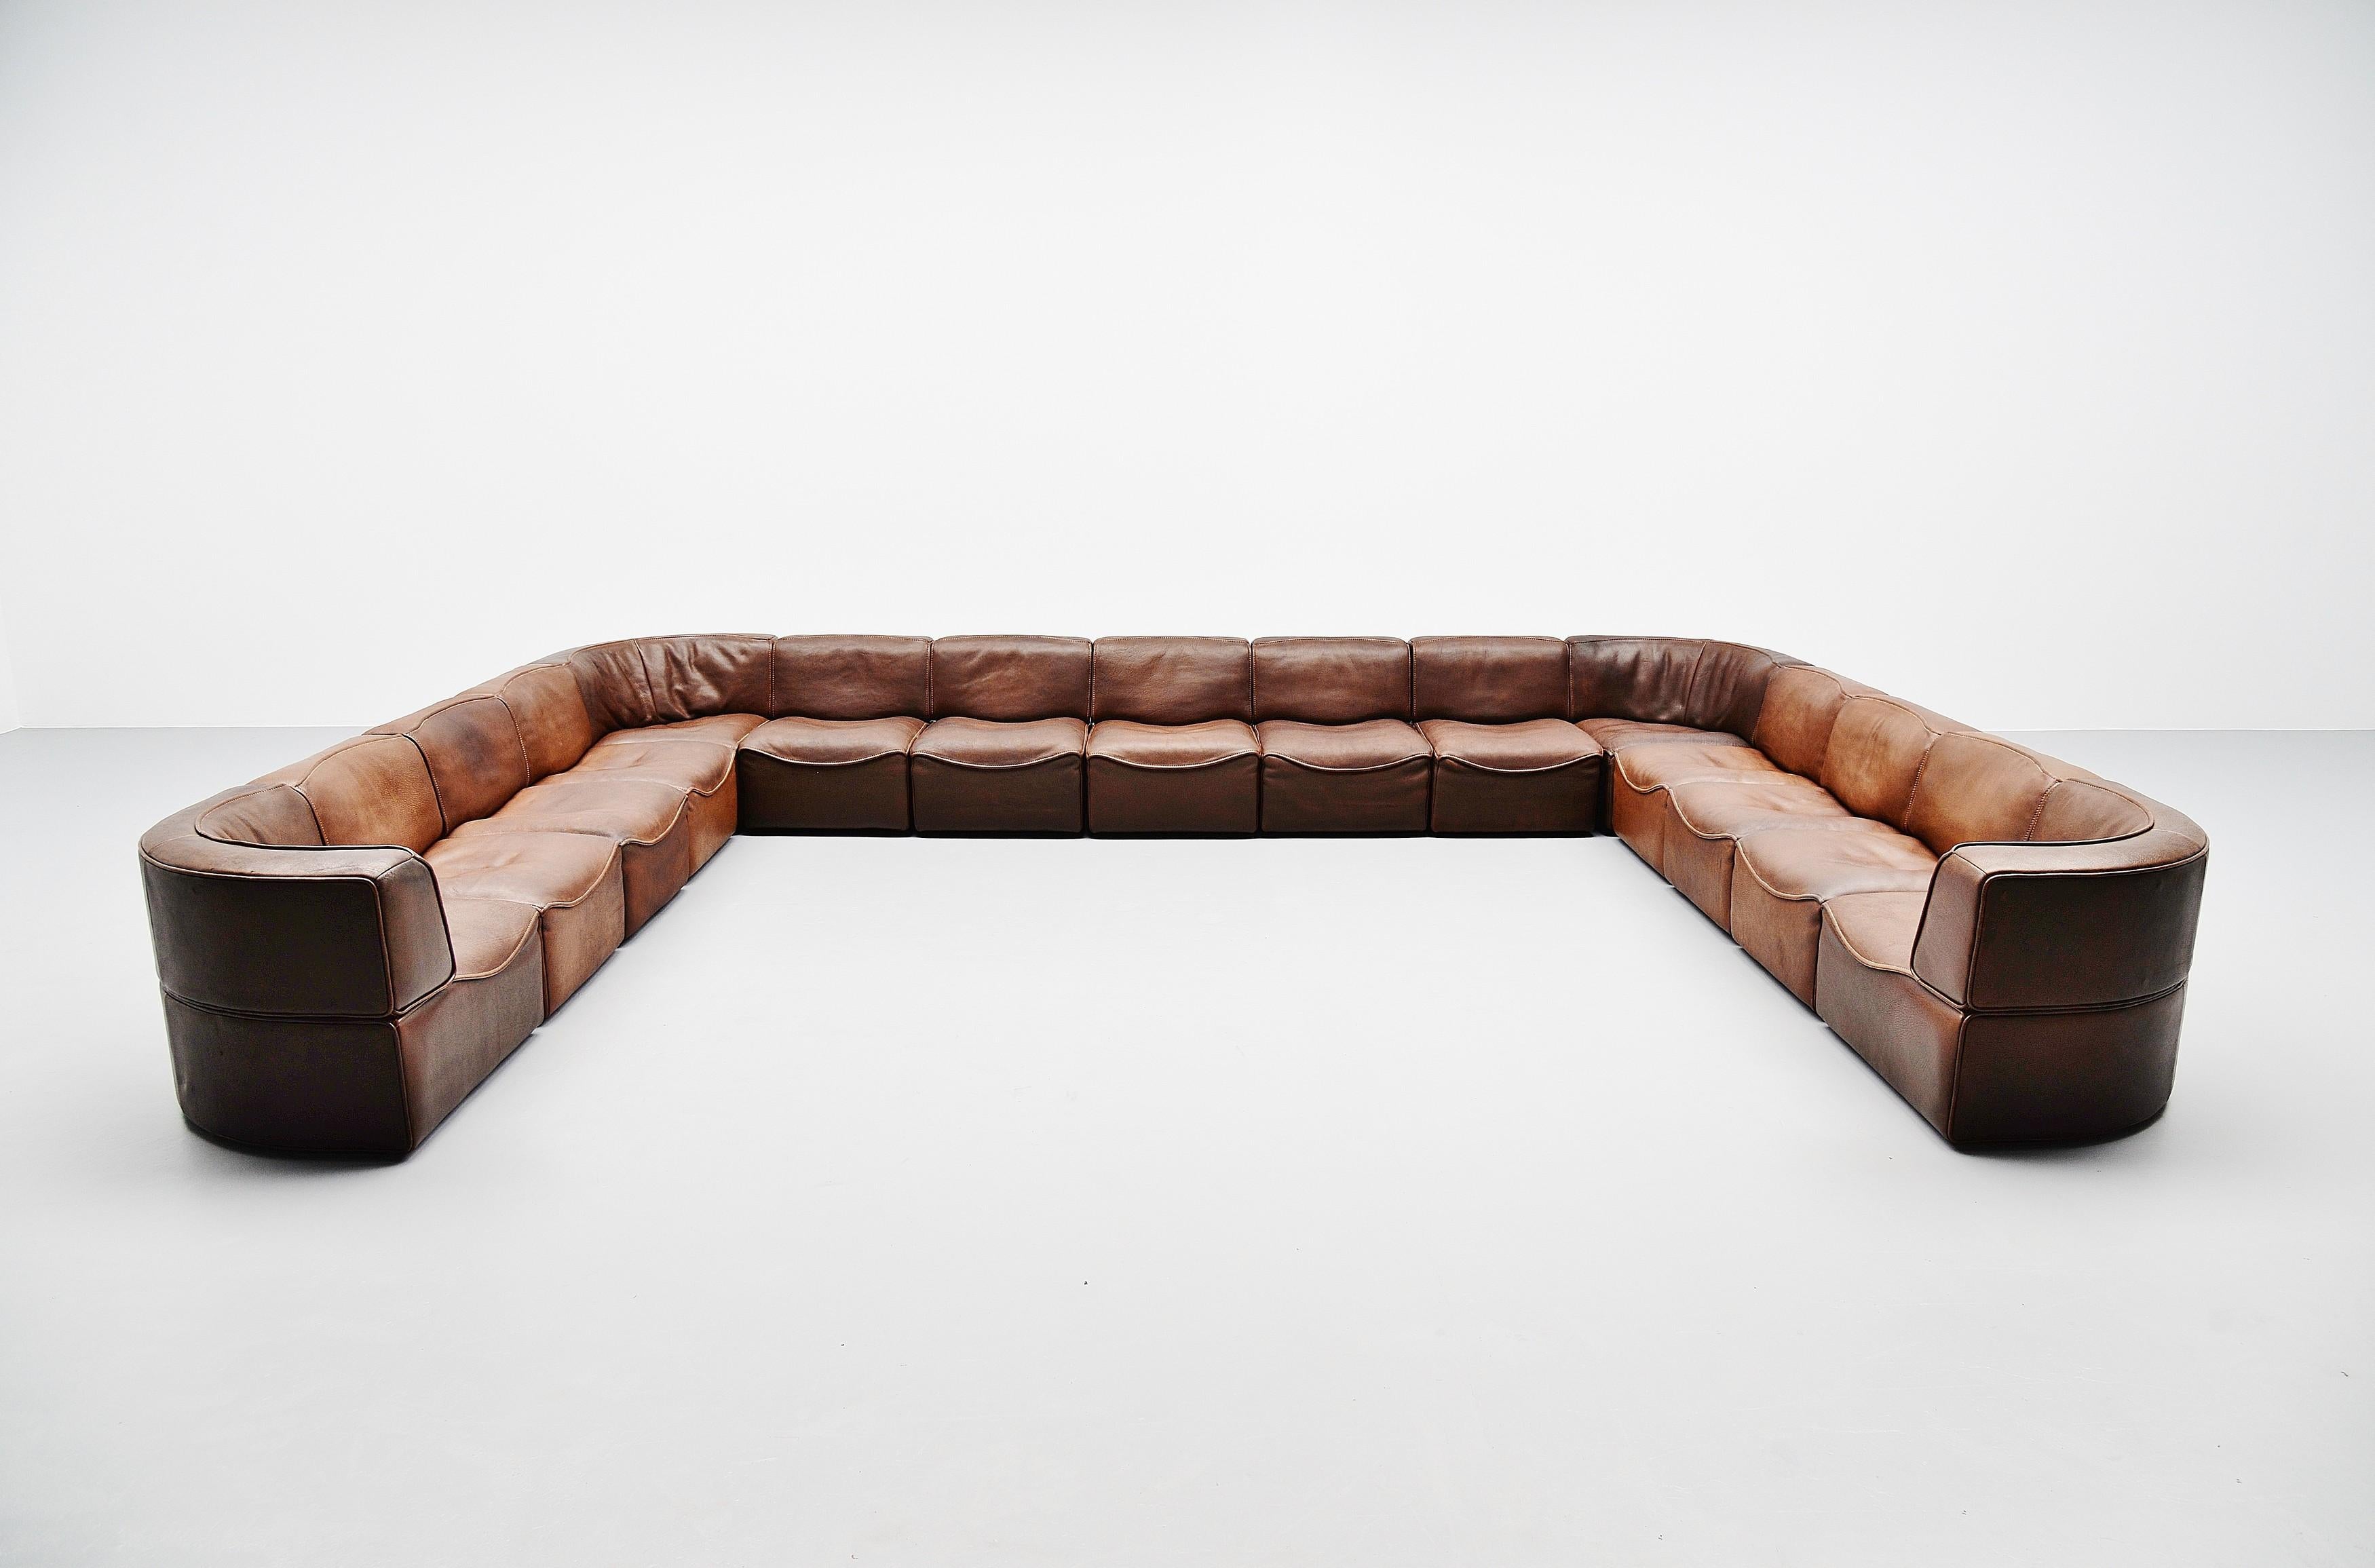 Very nice and large modular sofa designed and manufactured by De Sede, Switzerland 1970. This modular sofa is model DS15 and was made of very thick brown buffalo leather which is indestructible. De Sede is known for its quality leather used with